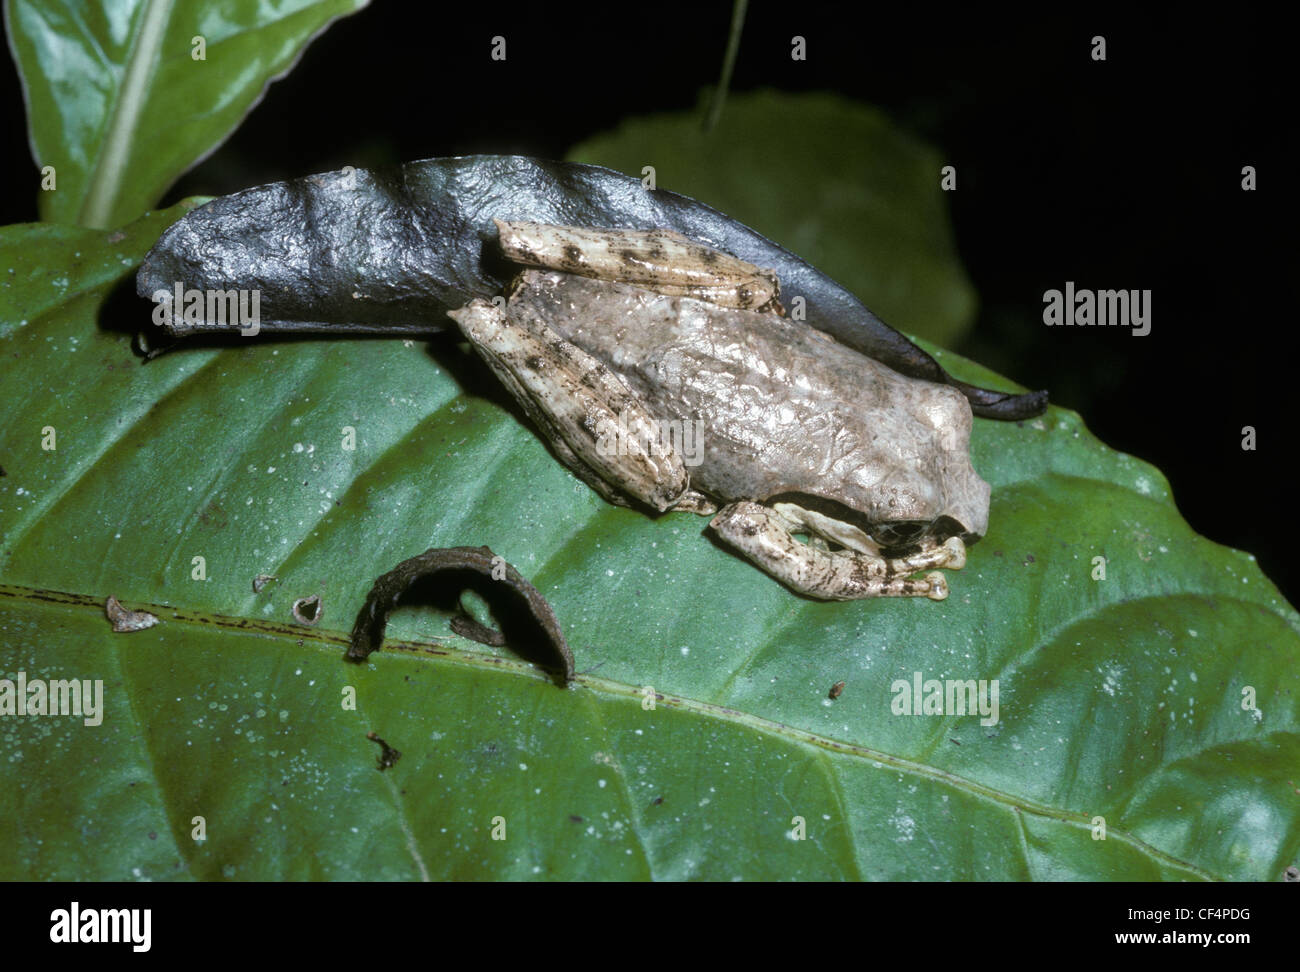 Tree frog (Boophis reticulatus) cryptic daytime resting pose in rainforest, Madagascar. 2006 IUCN Red List of Threatened Species Stock Photo